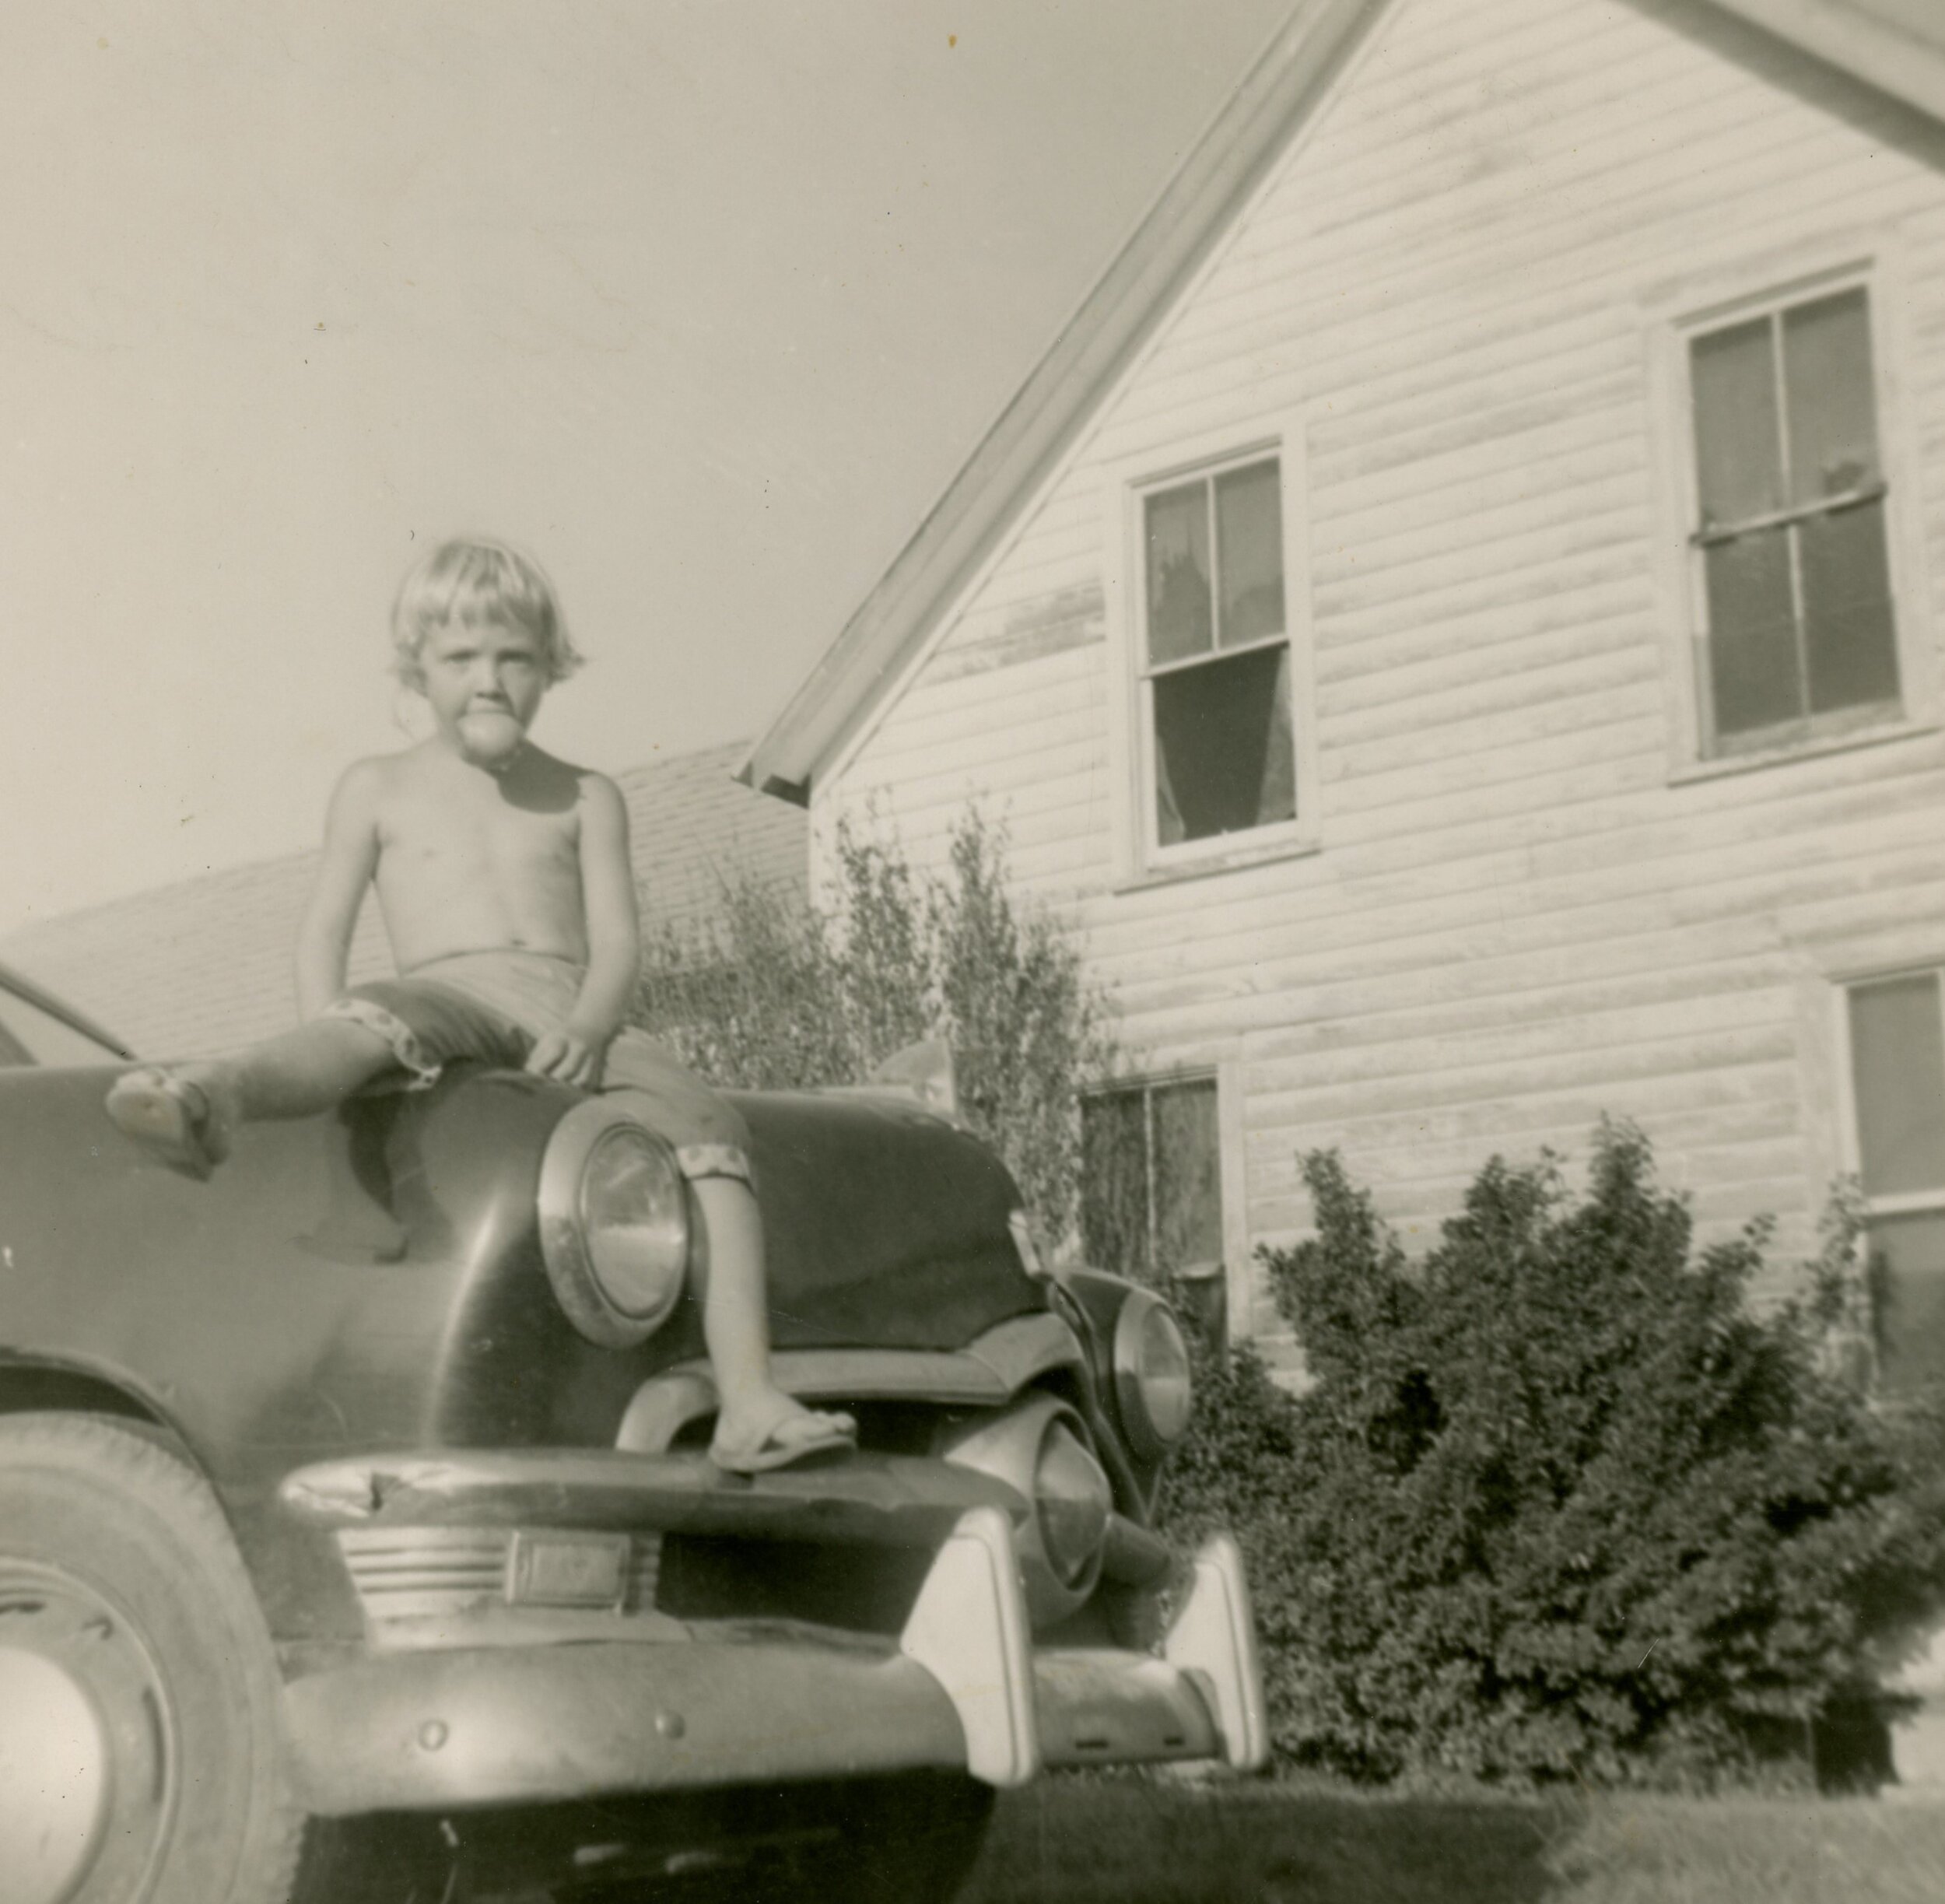 Ginger sitting on a car beside Aunt Gertie’s house on the shore